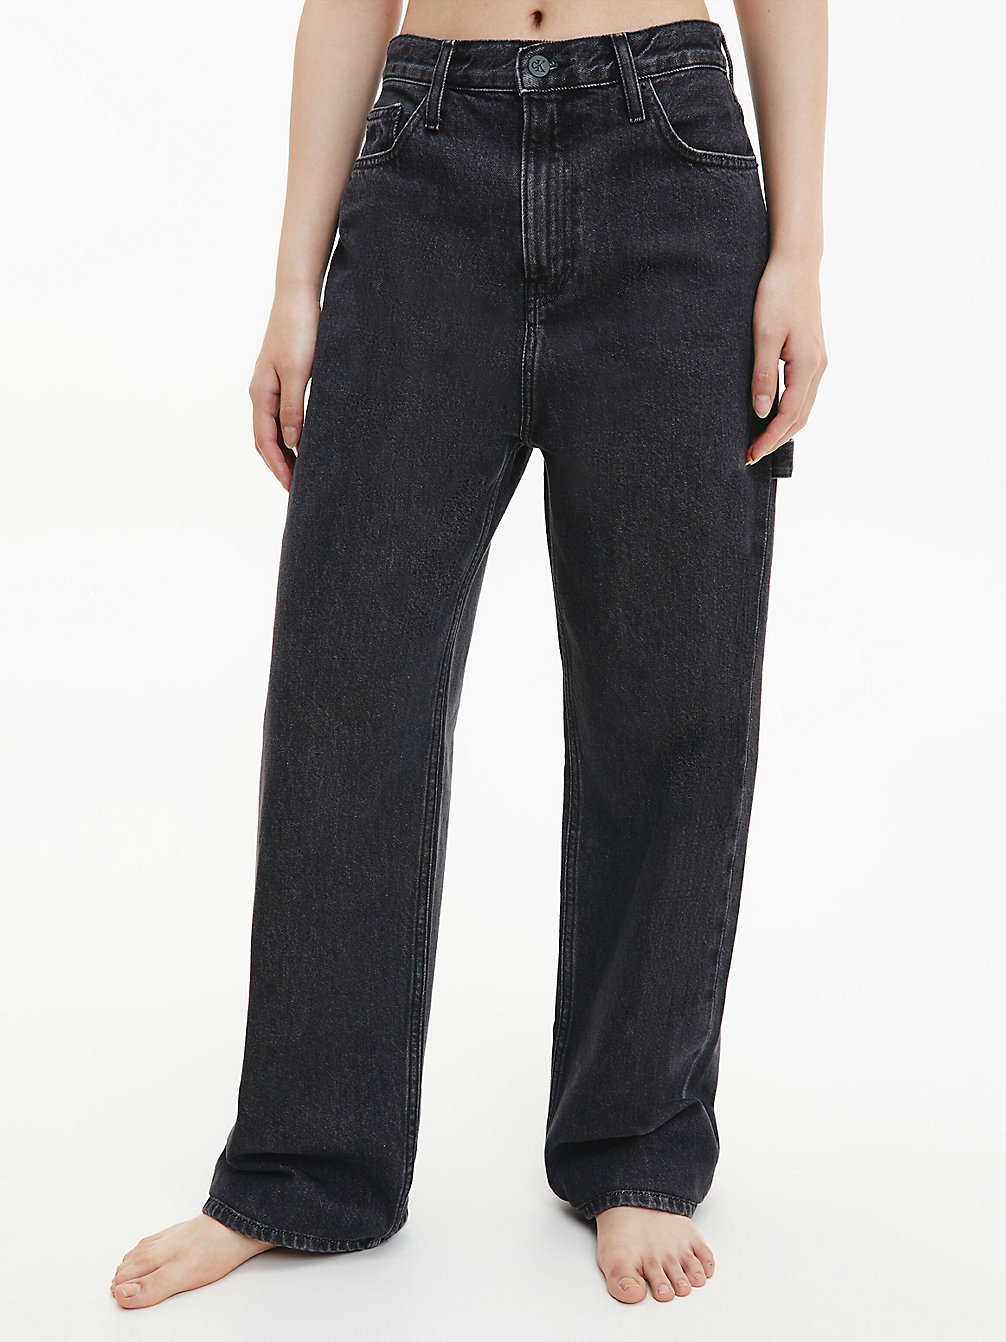 CK BLACK > High Rise Relaxed Utility Jeans > undefined Damen - Calvin Klein